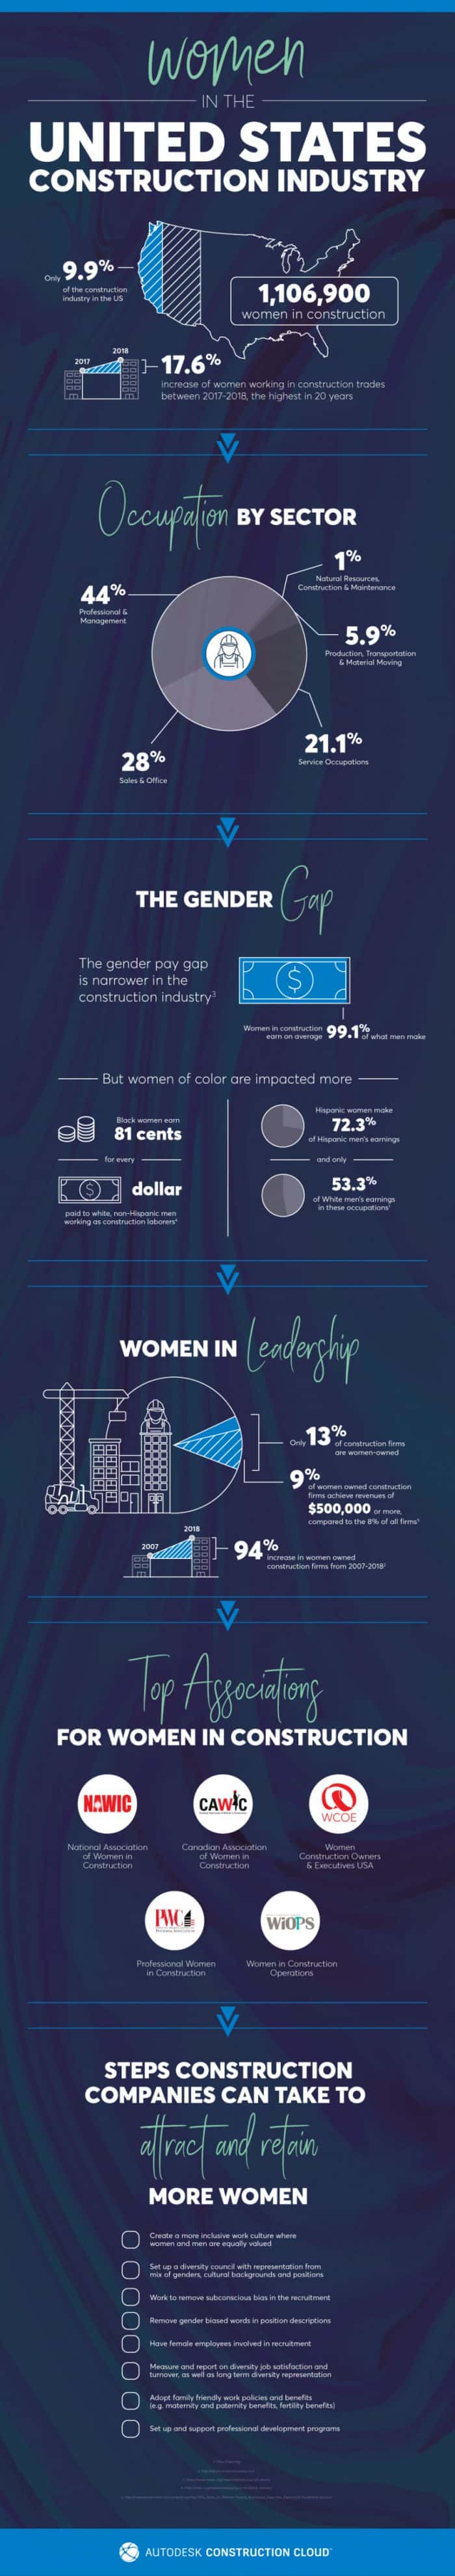 Women in the United States Construction Industry